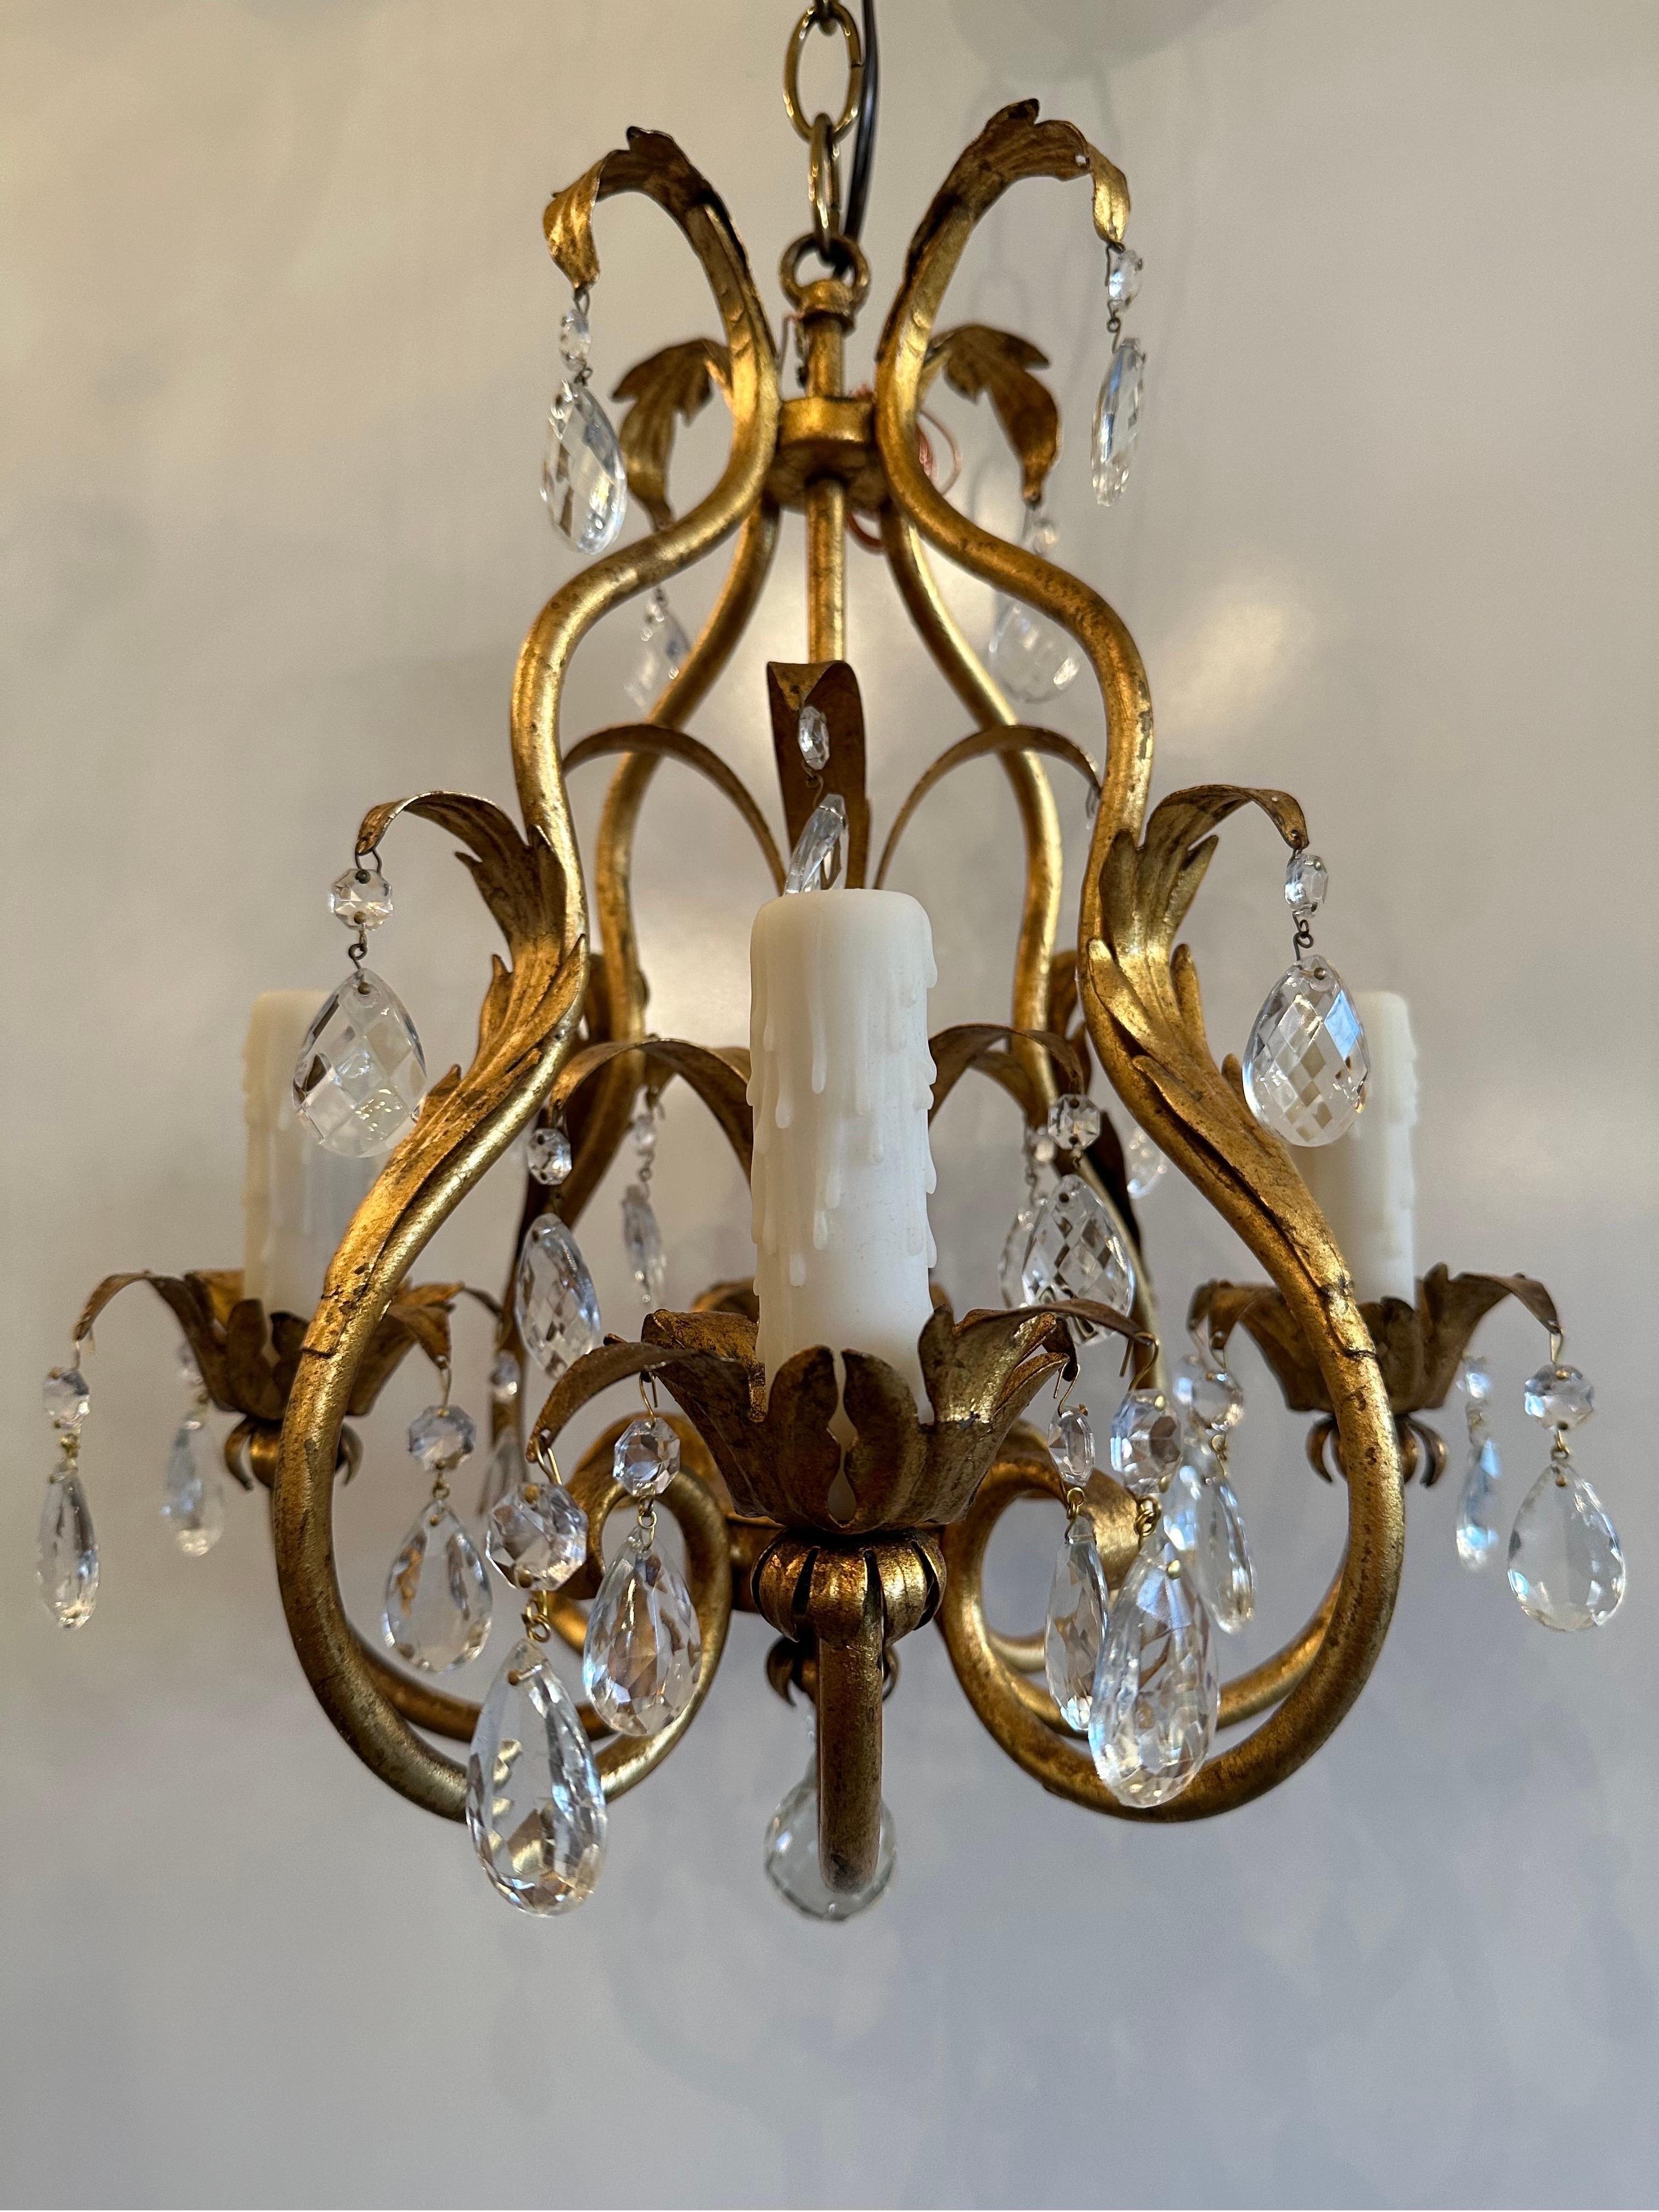 4-Light Italian Chandelier with Gilded Gold Finish In Good Condition For Sale In Marshville, NC